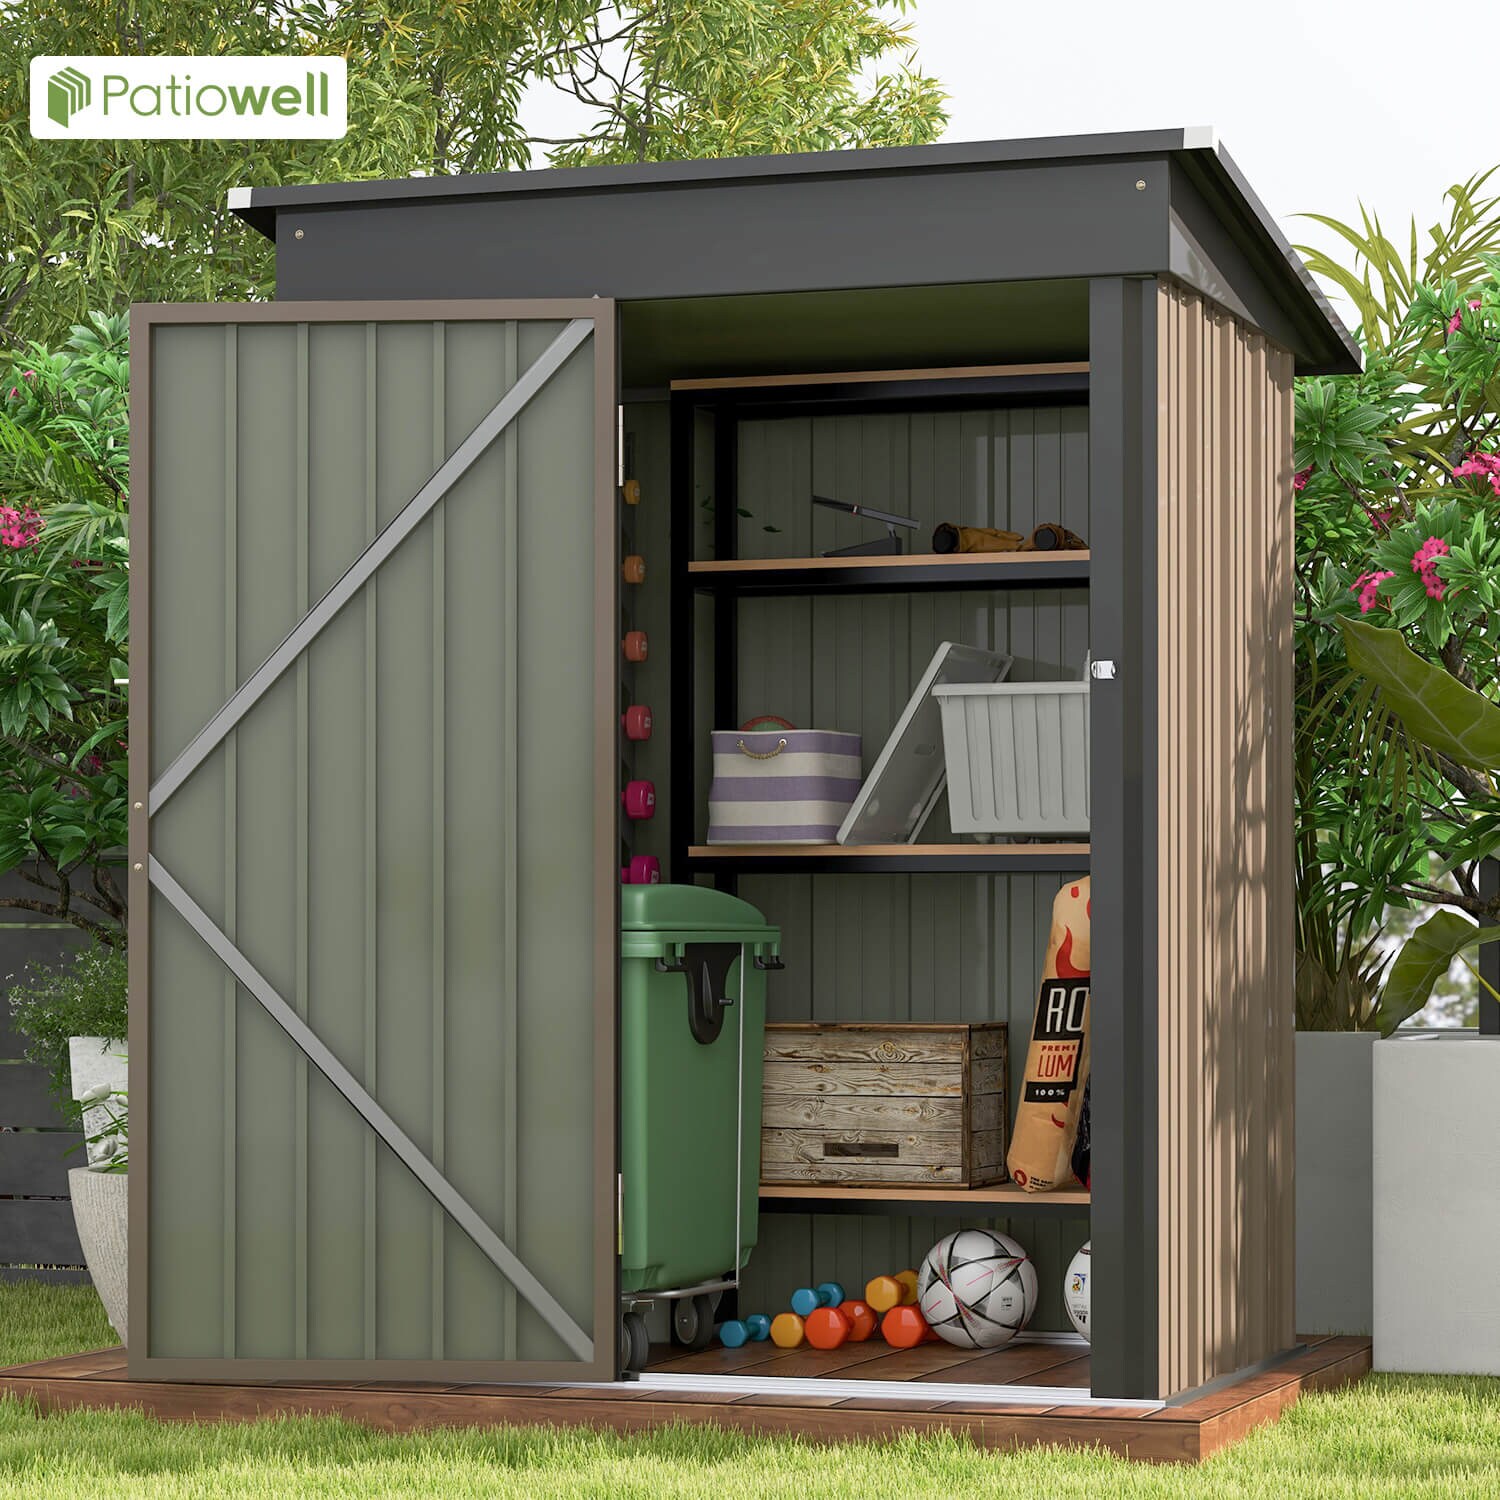 Patiowell 5-ft x 3-ft Steel Storage Shed in the Metal Storage Sheds ...